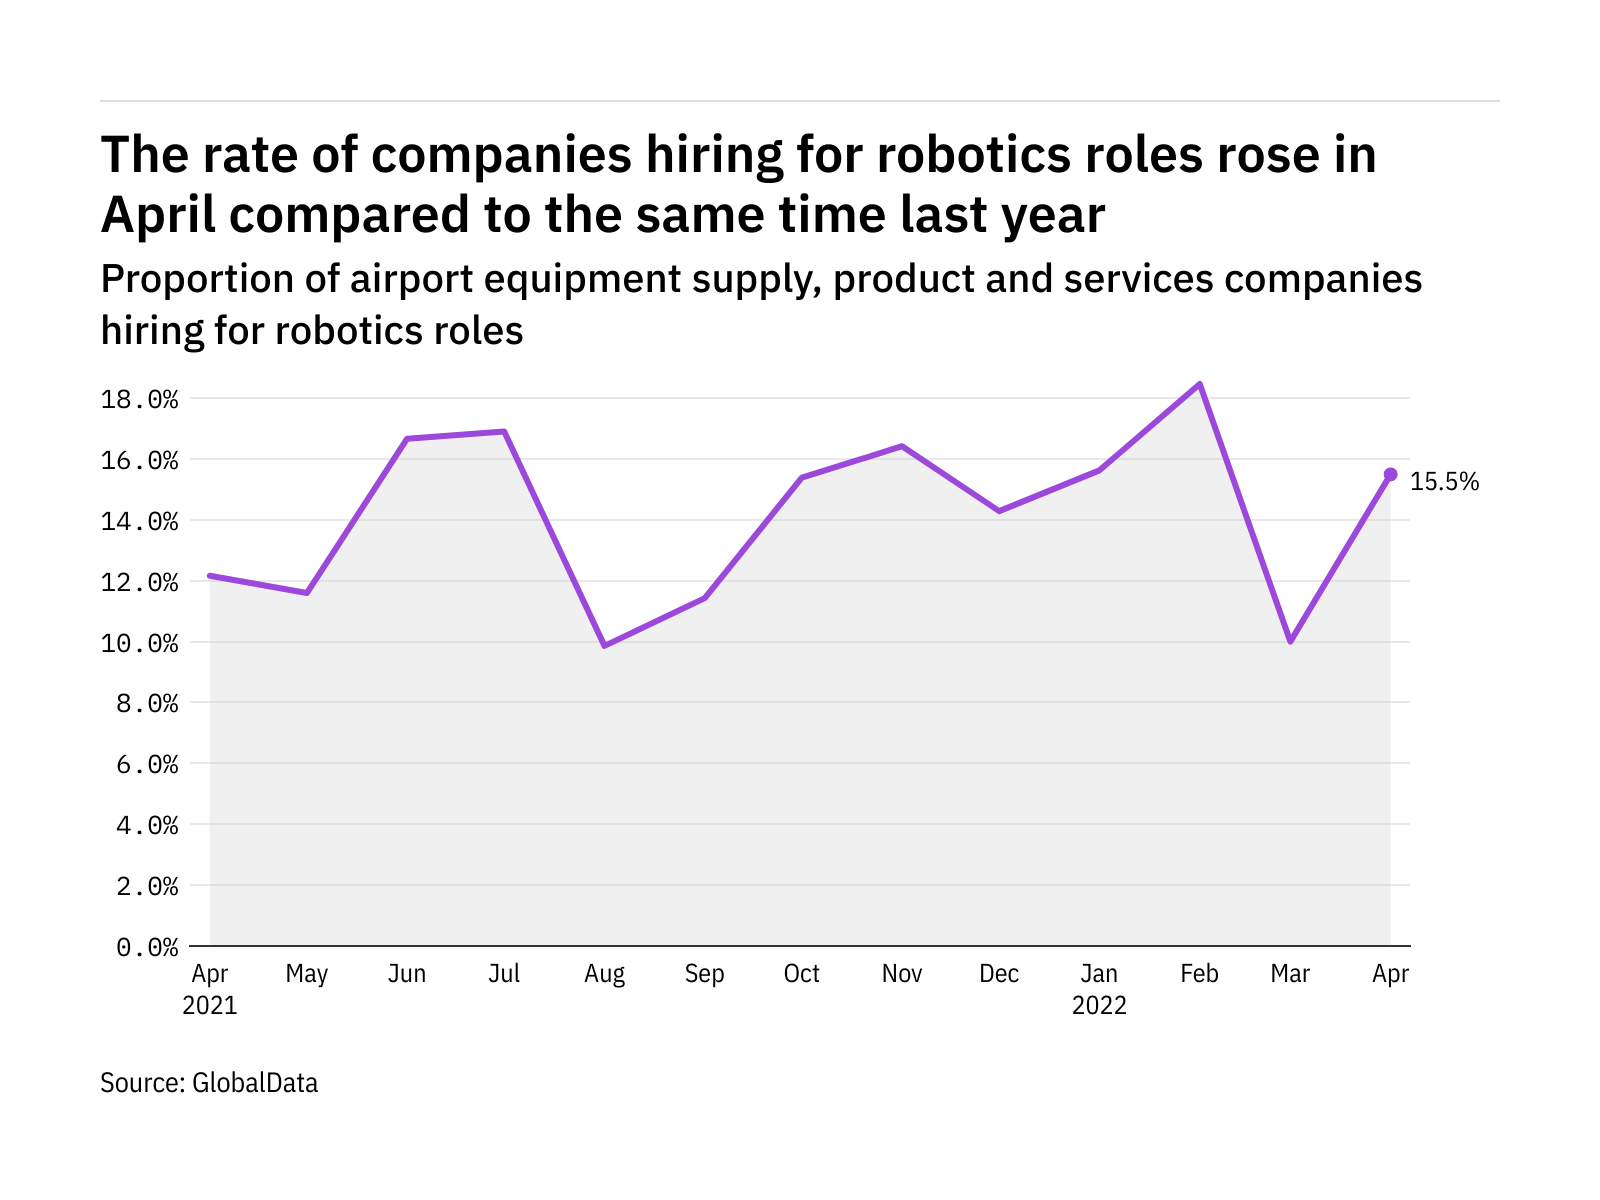 Robotics hiring levels in the airport industry rose in April 2022